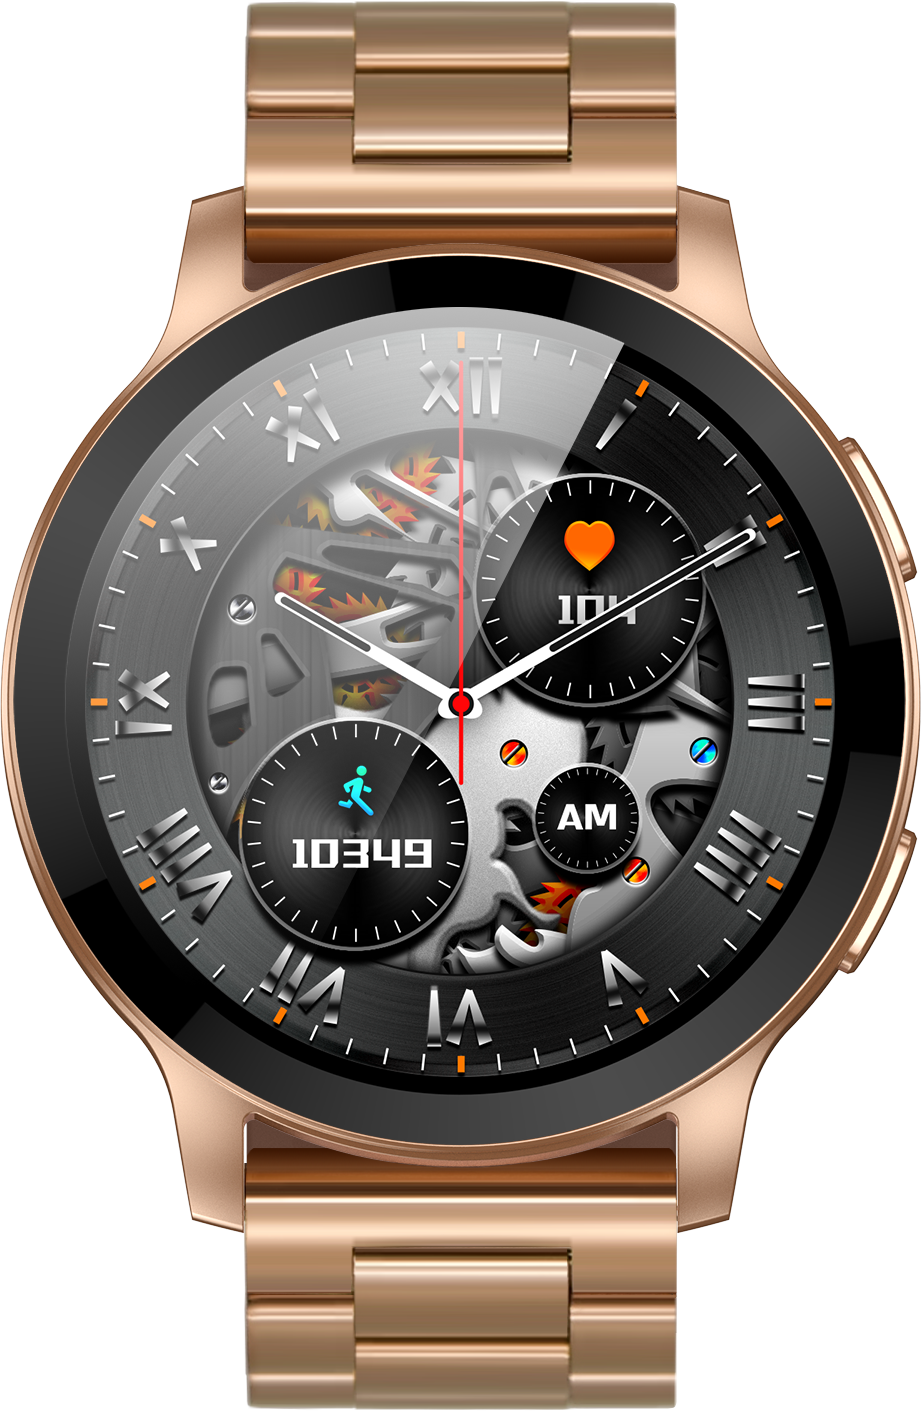 Mibro Watch A2 and C3 Malaysia release: Bluetooth calling, heart-rate  monitoring, 10-day battery life, and more from RM169 | TechNave